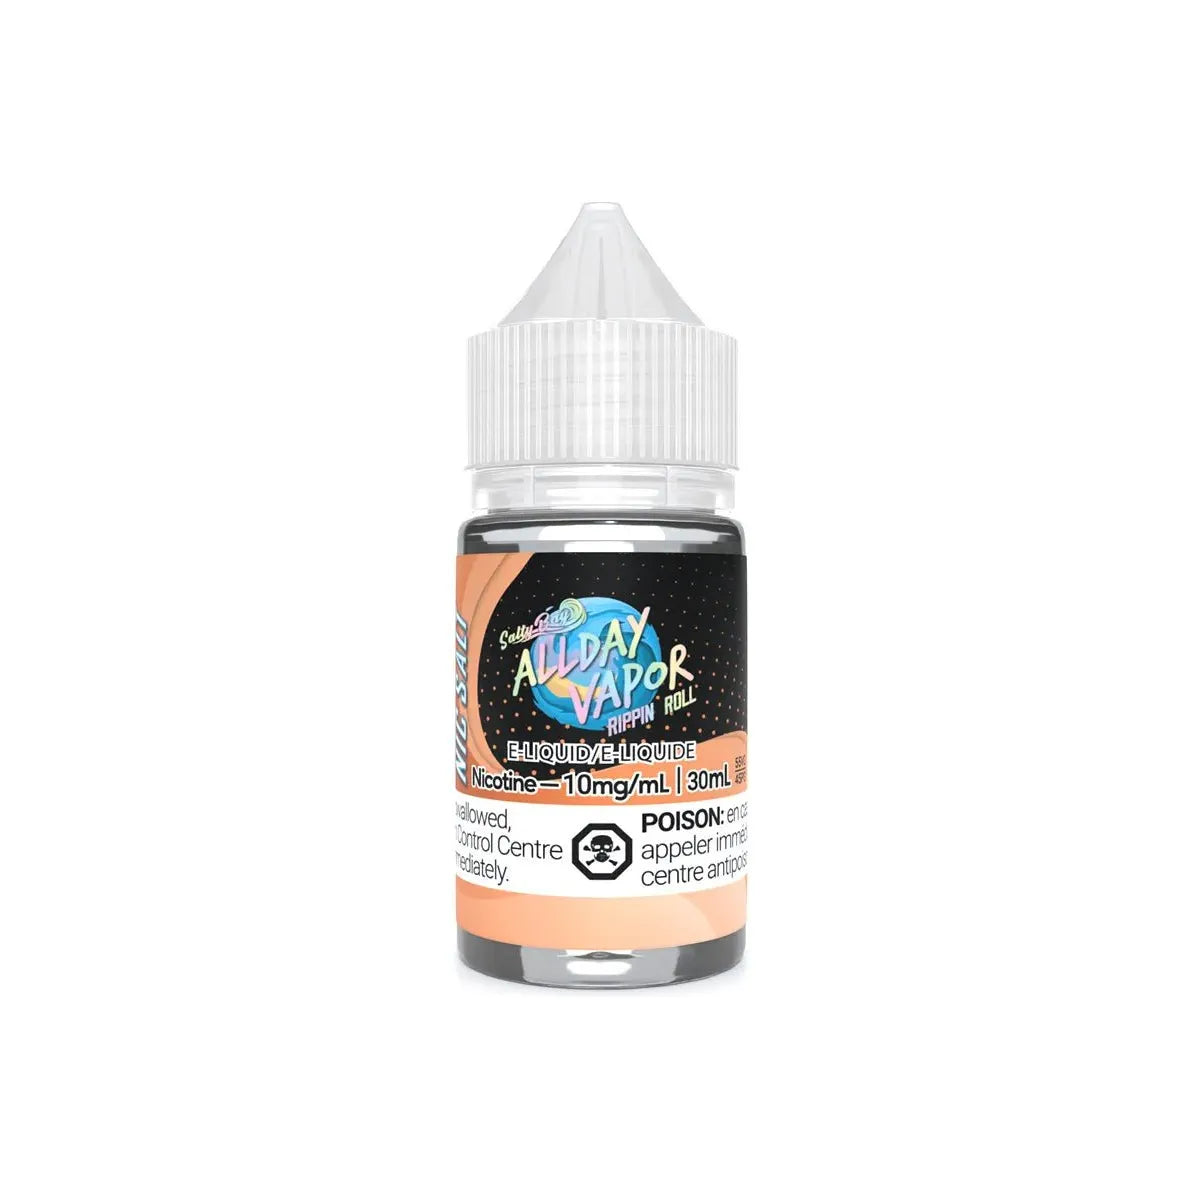 Shop Rippin Roll Nic Salt by All Day Vapor - at Vapeshop Mania